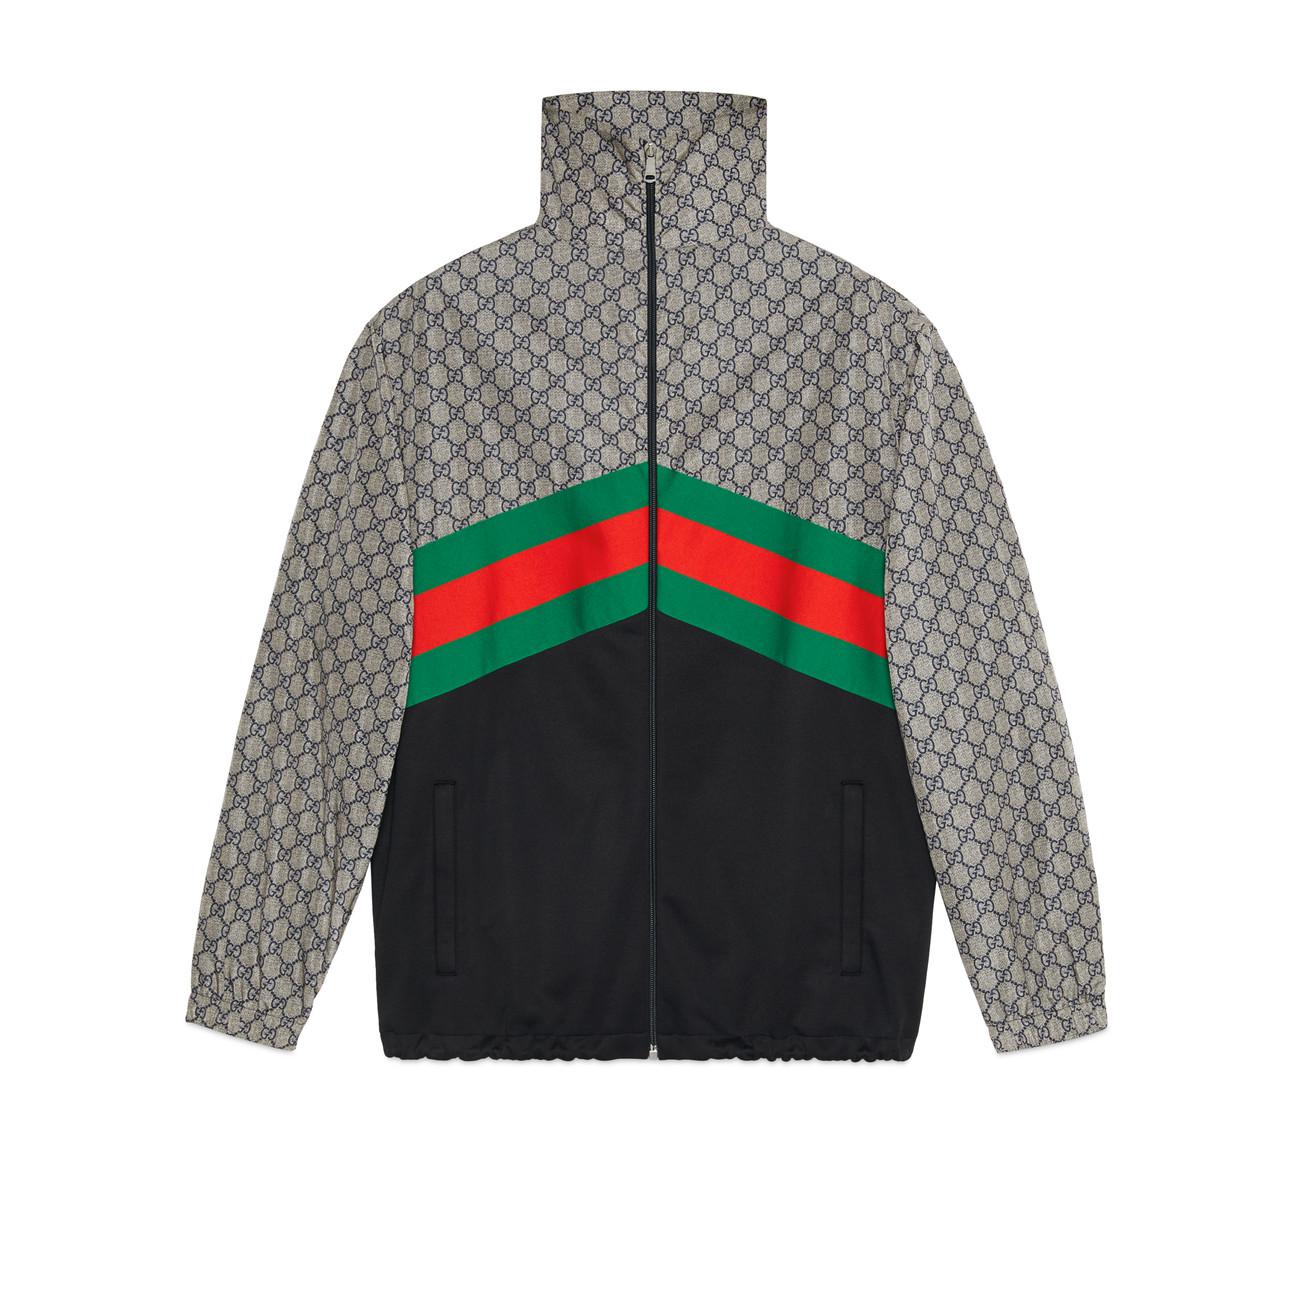 Gucci Synthetic Oversize Technical Jersey Jacket in Green for Men - Lyst